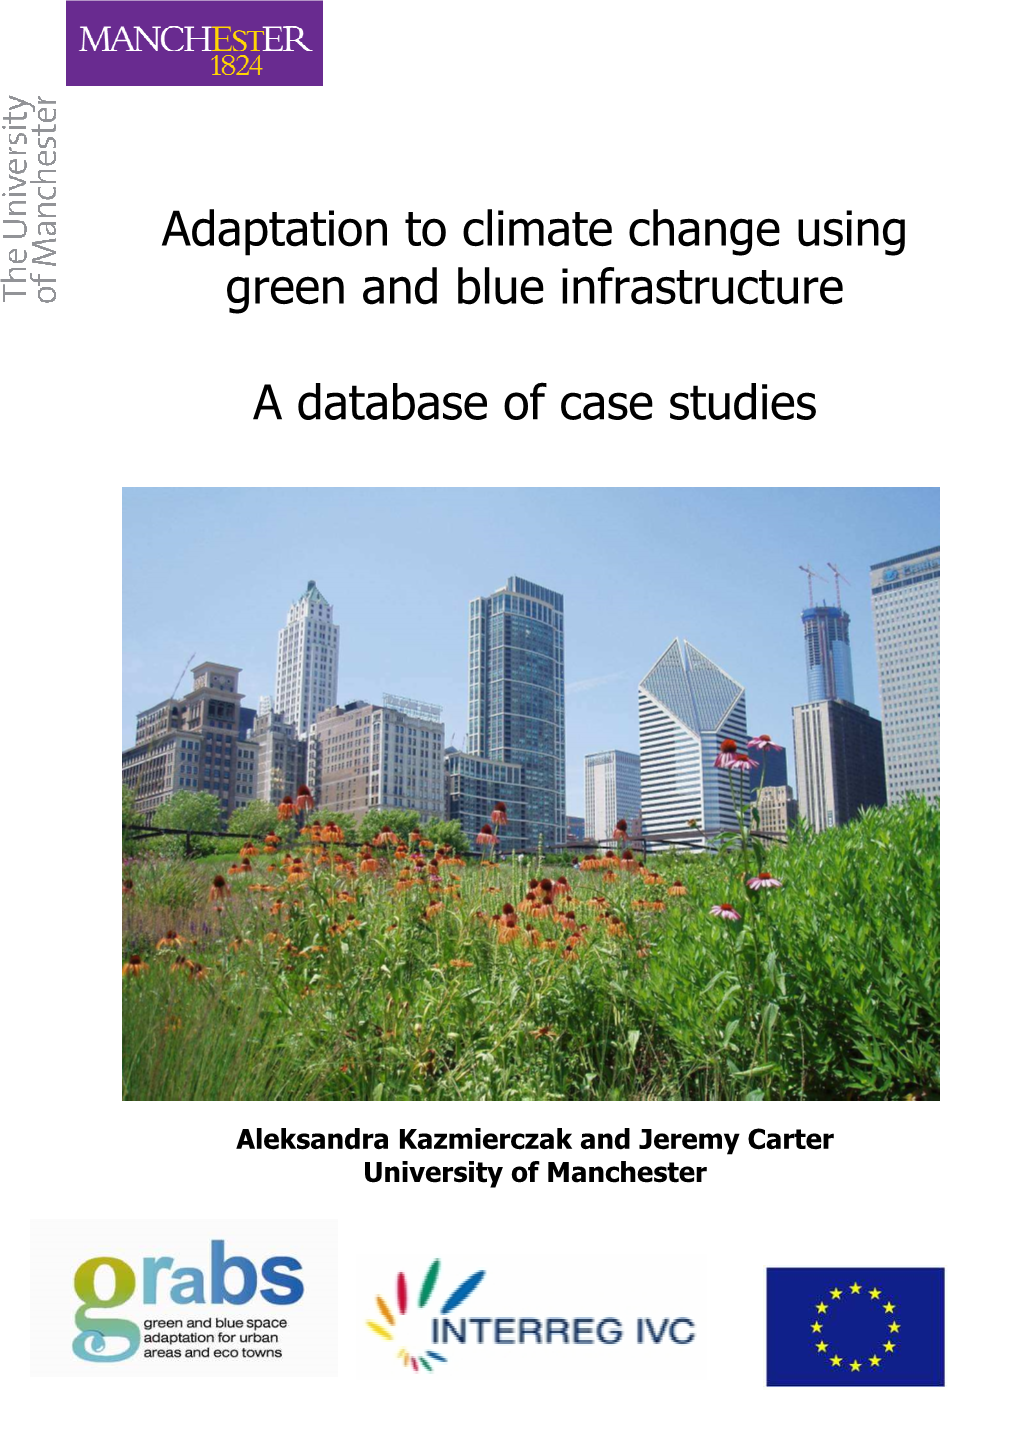 Adaptation to Climate Change Using Green and Blue Infrastructure a Database of Case Studies